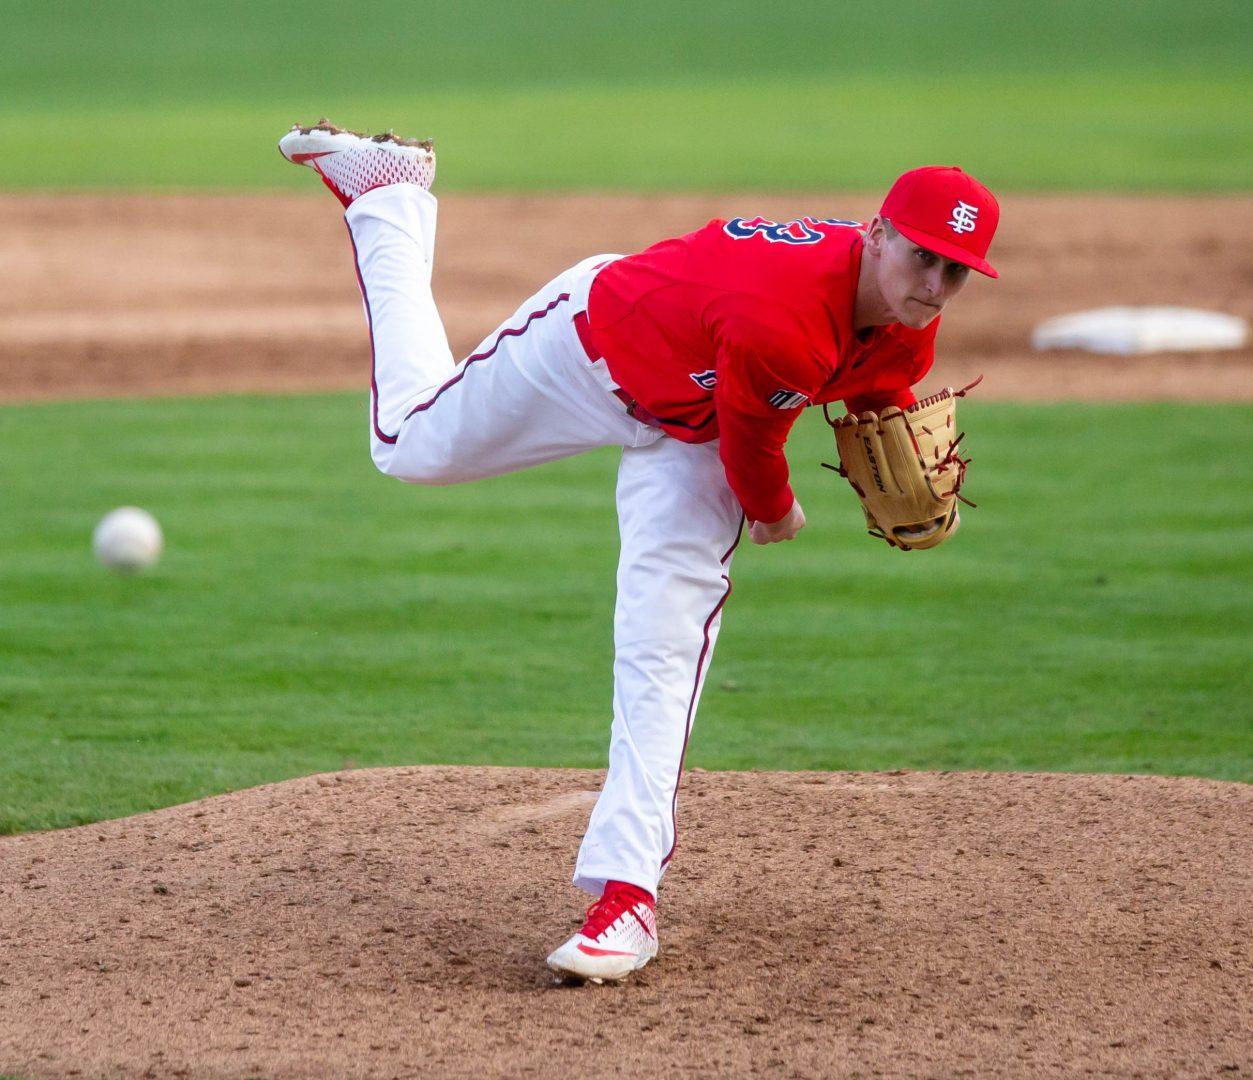  Fresno State’s Kyle Pruhsmeier throws a pitch during the Fresno State alumni game at Peter Beiden Field on Saturday Feb. 9, 2019. (Jose Romo Jr./The Collegian).